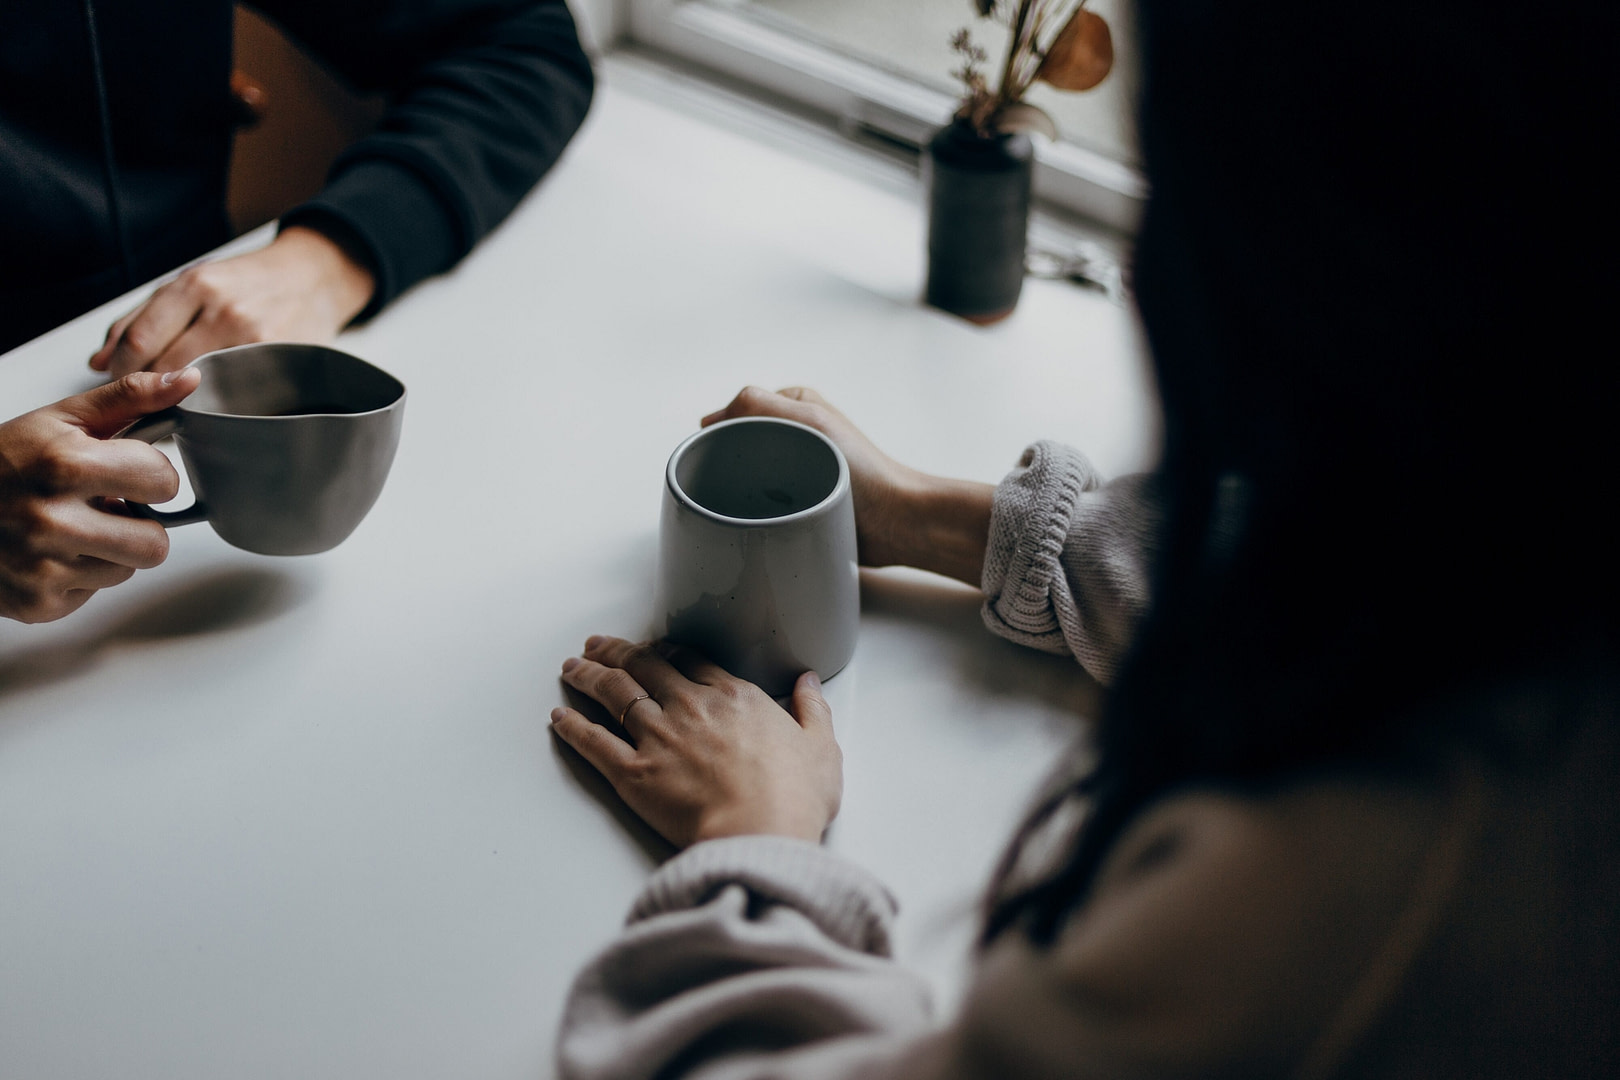 Hands holding coffee cups on a table